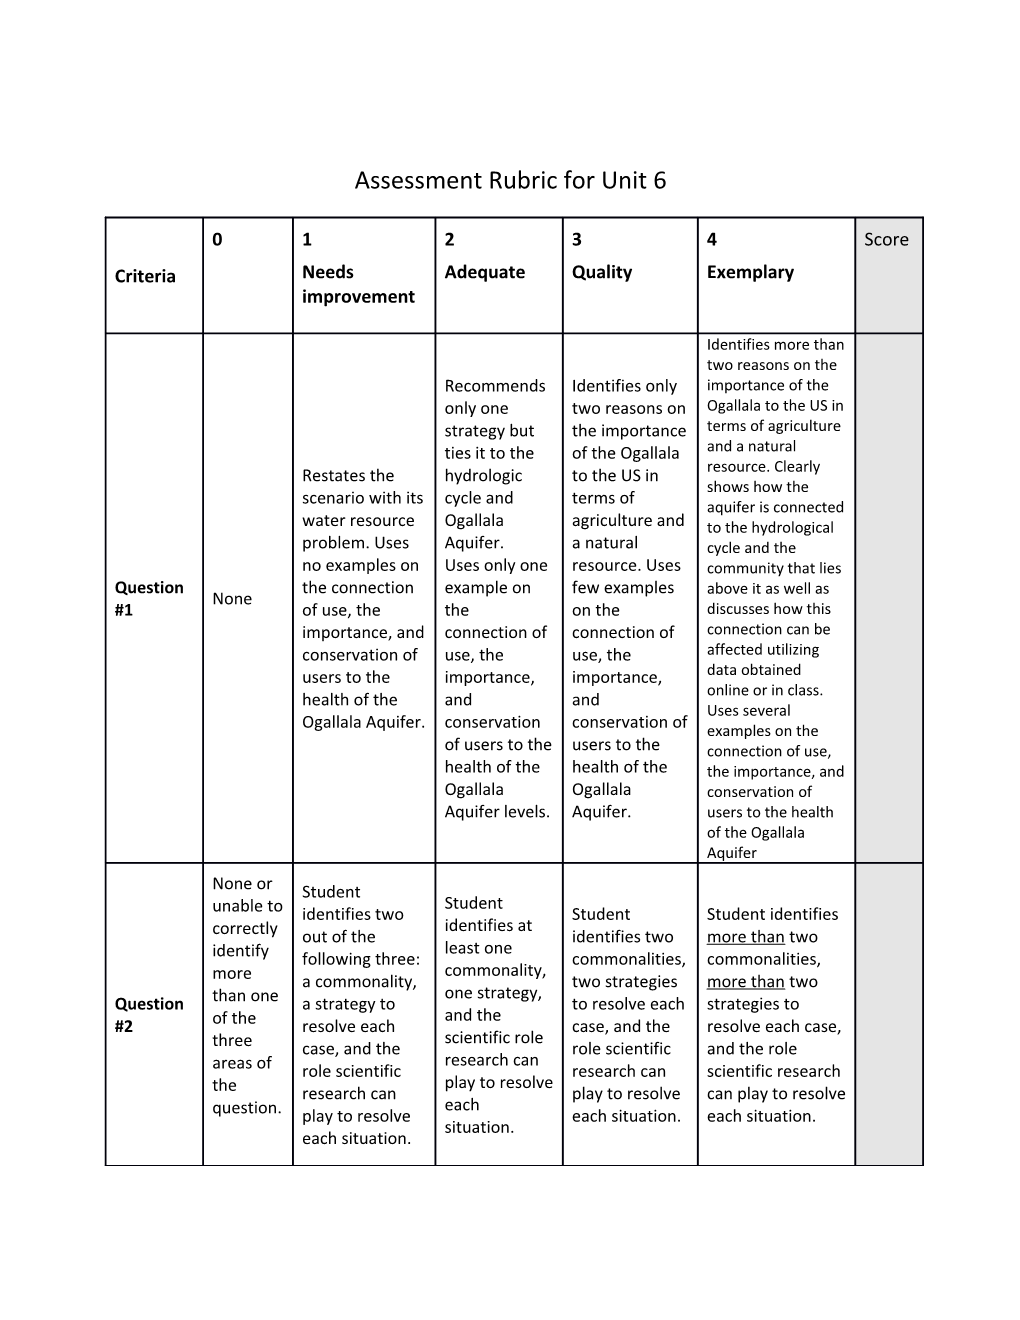 Assessment Rubric for Unit 6